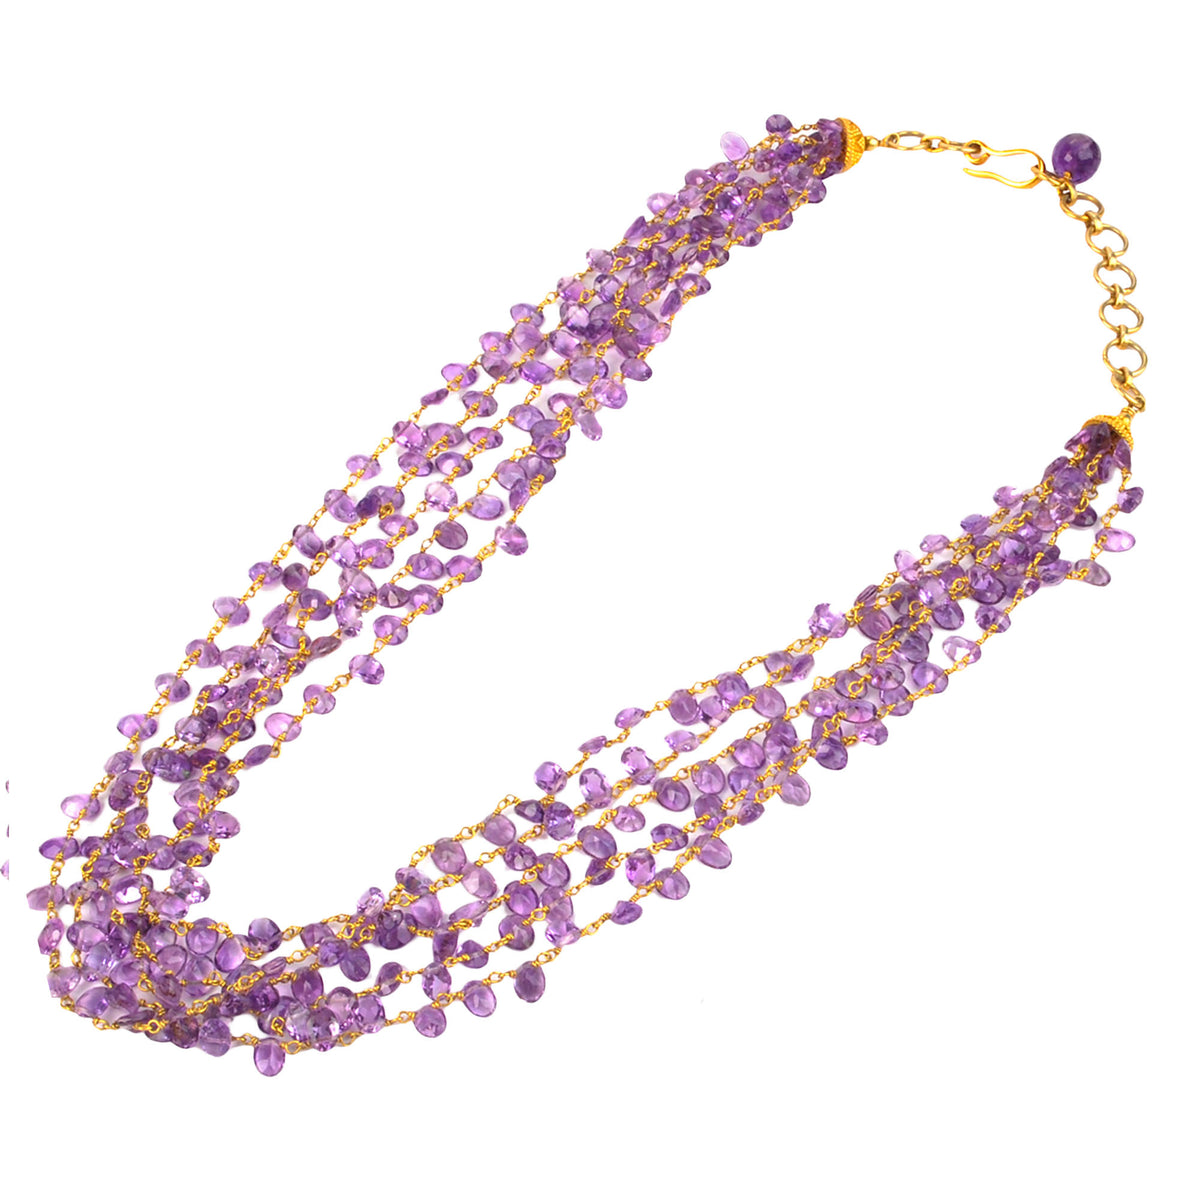 Amethyst beads multi strands necklace